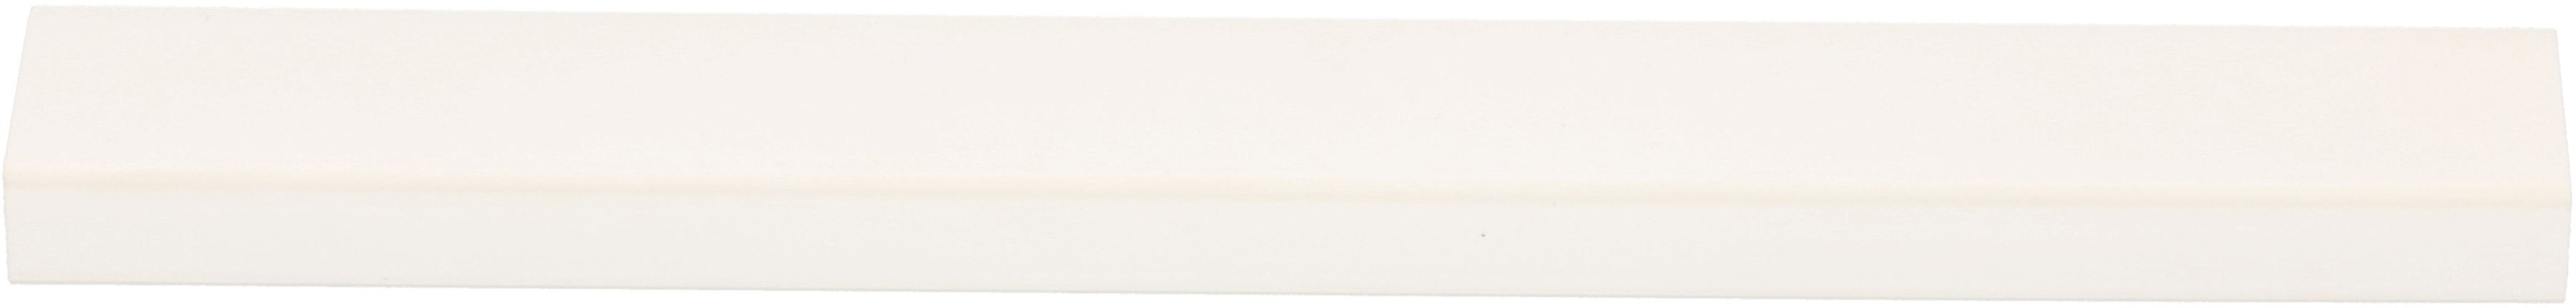 Cable duct white RAL 9003, 21x11,5mm